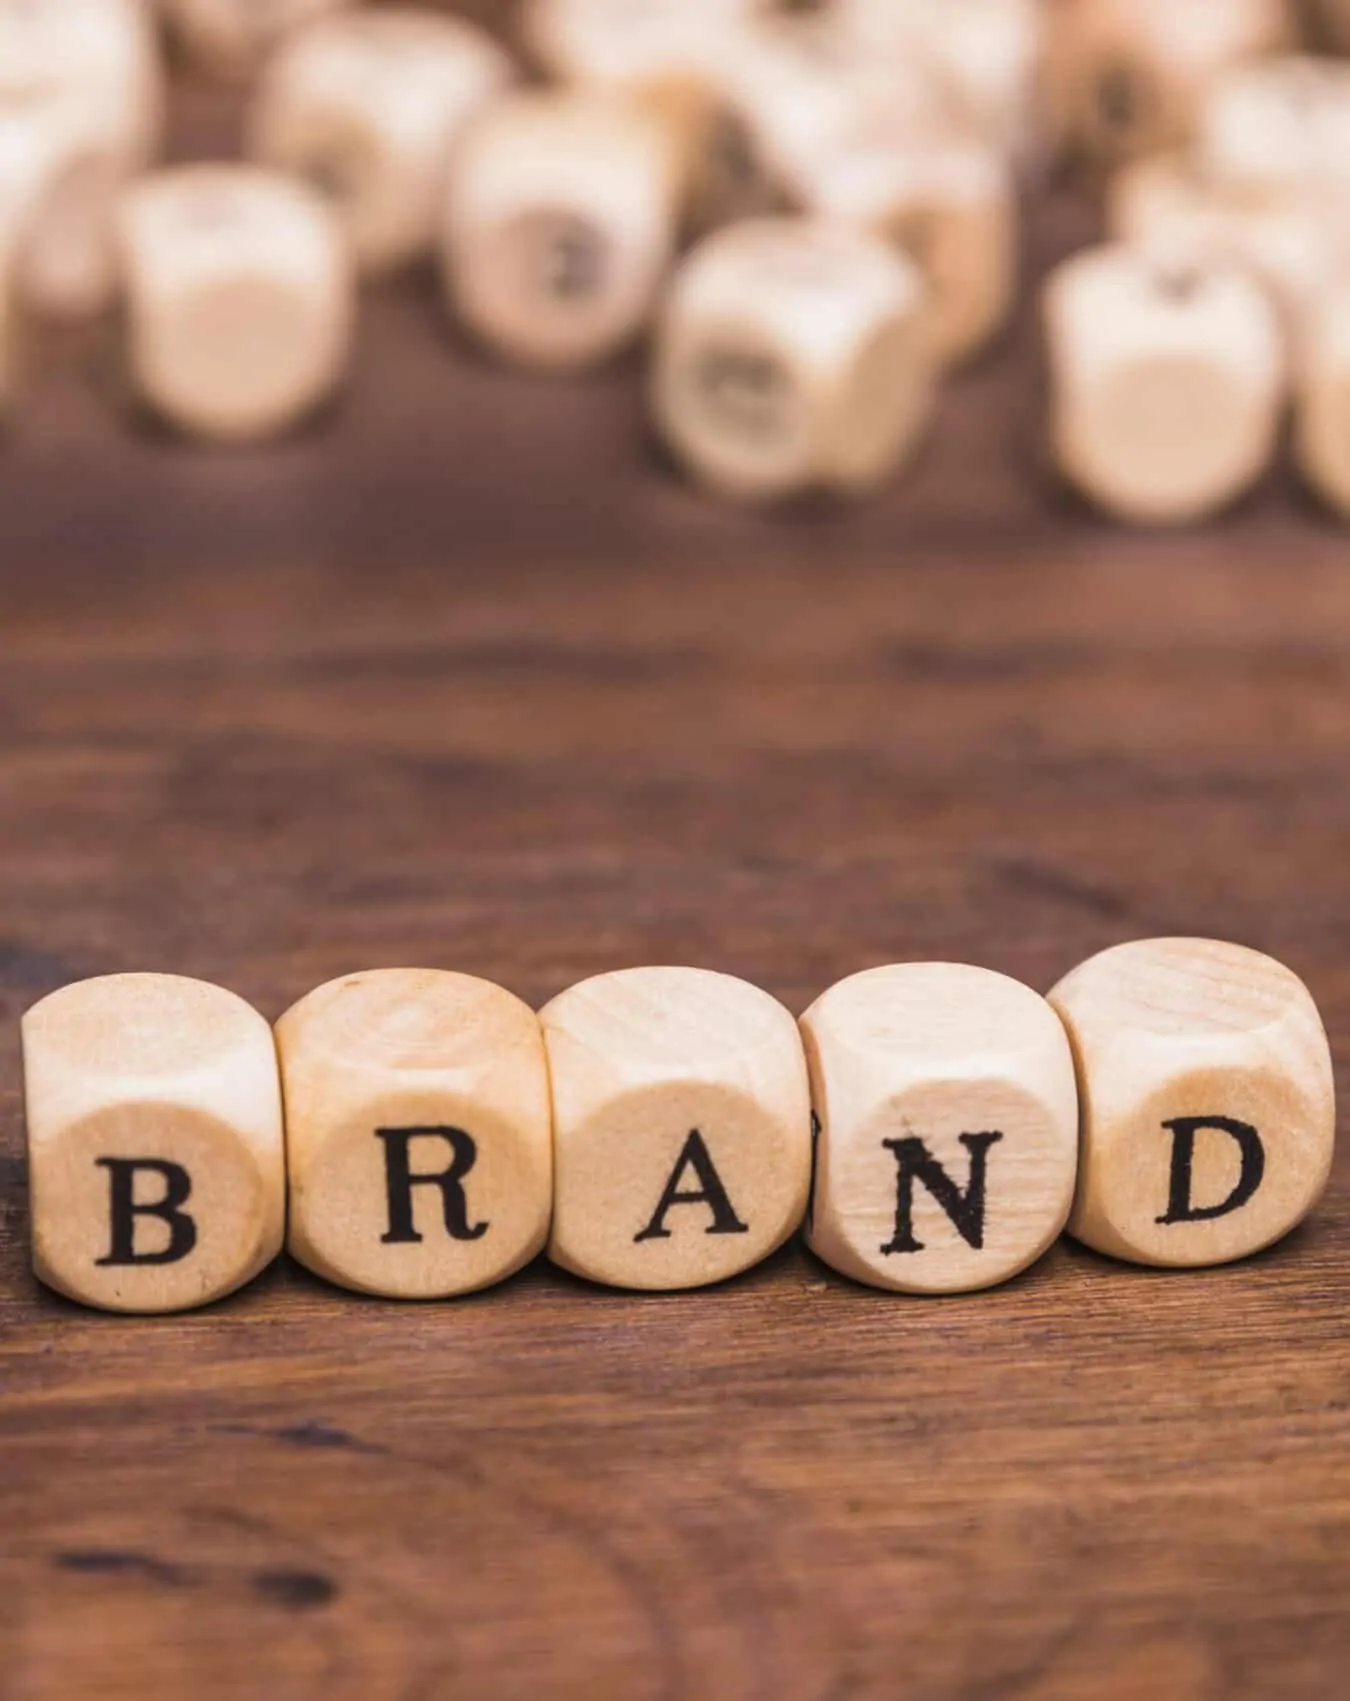 Business Branding: The Complete Course Part 1 - Strategy